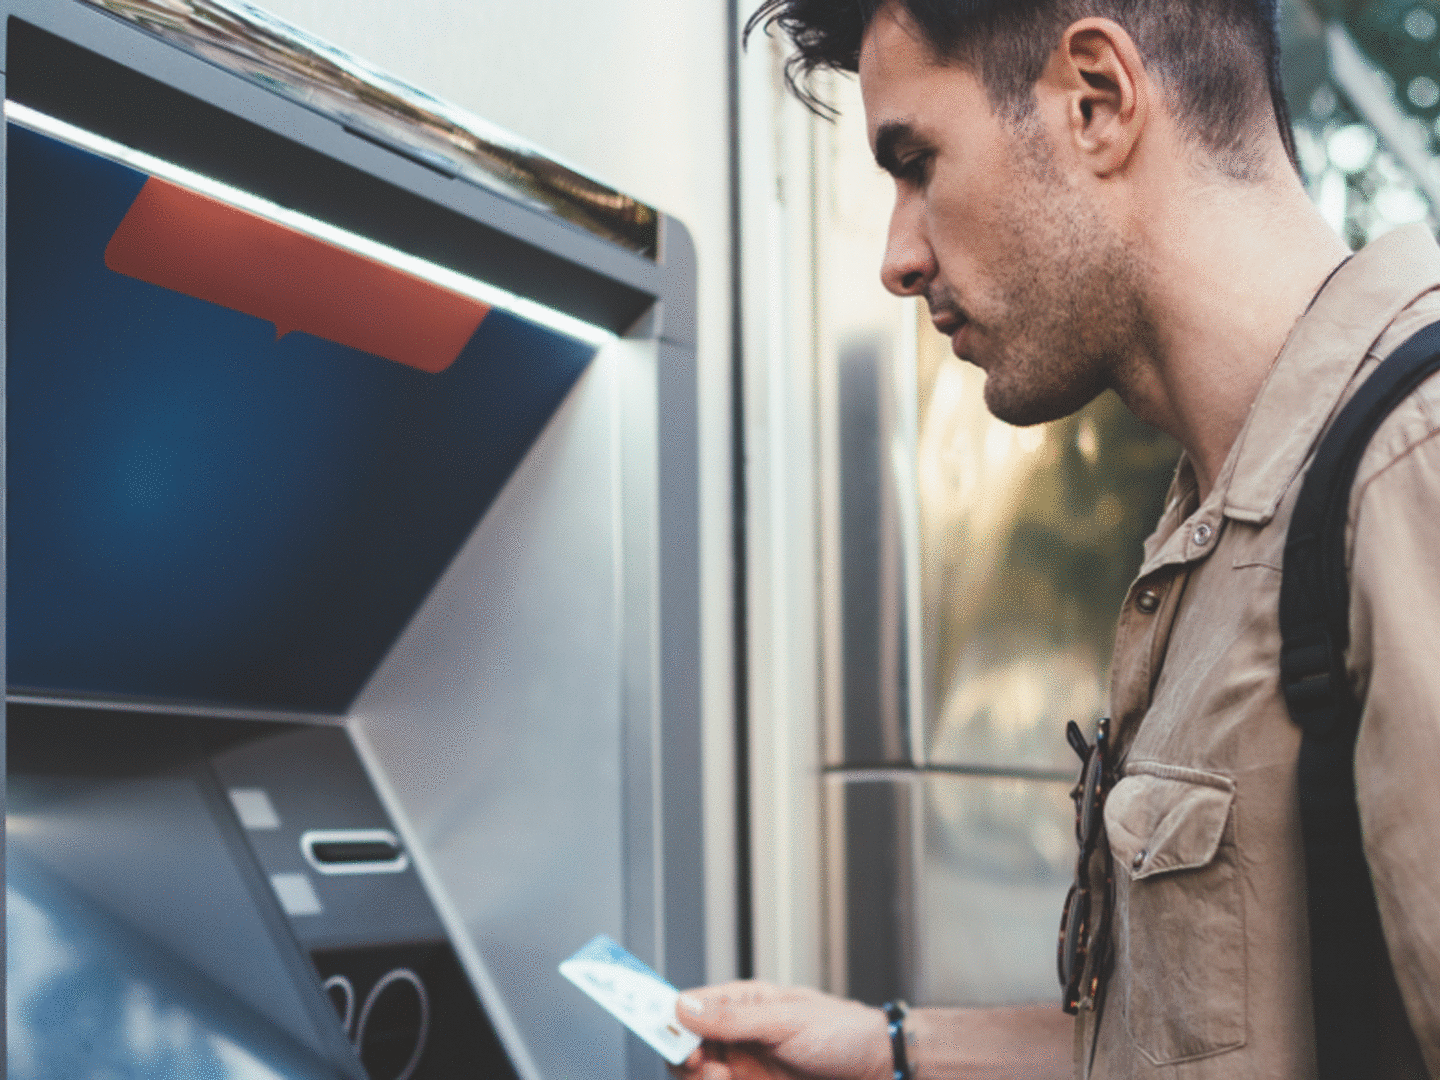 Man standing in front of ATM machine with card in hand looking at screen.